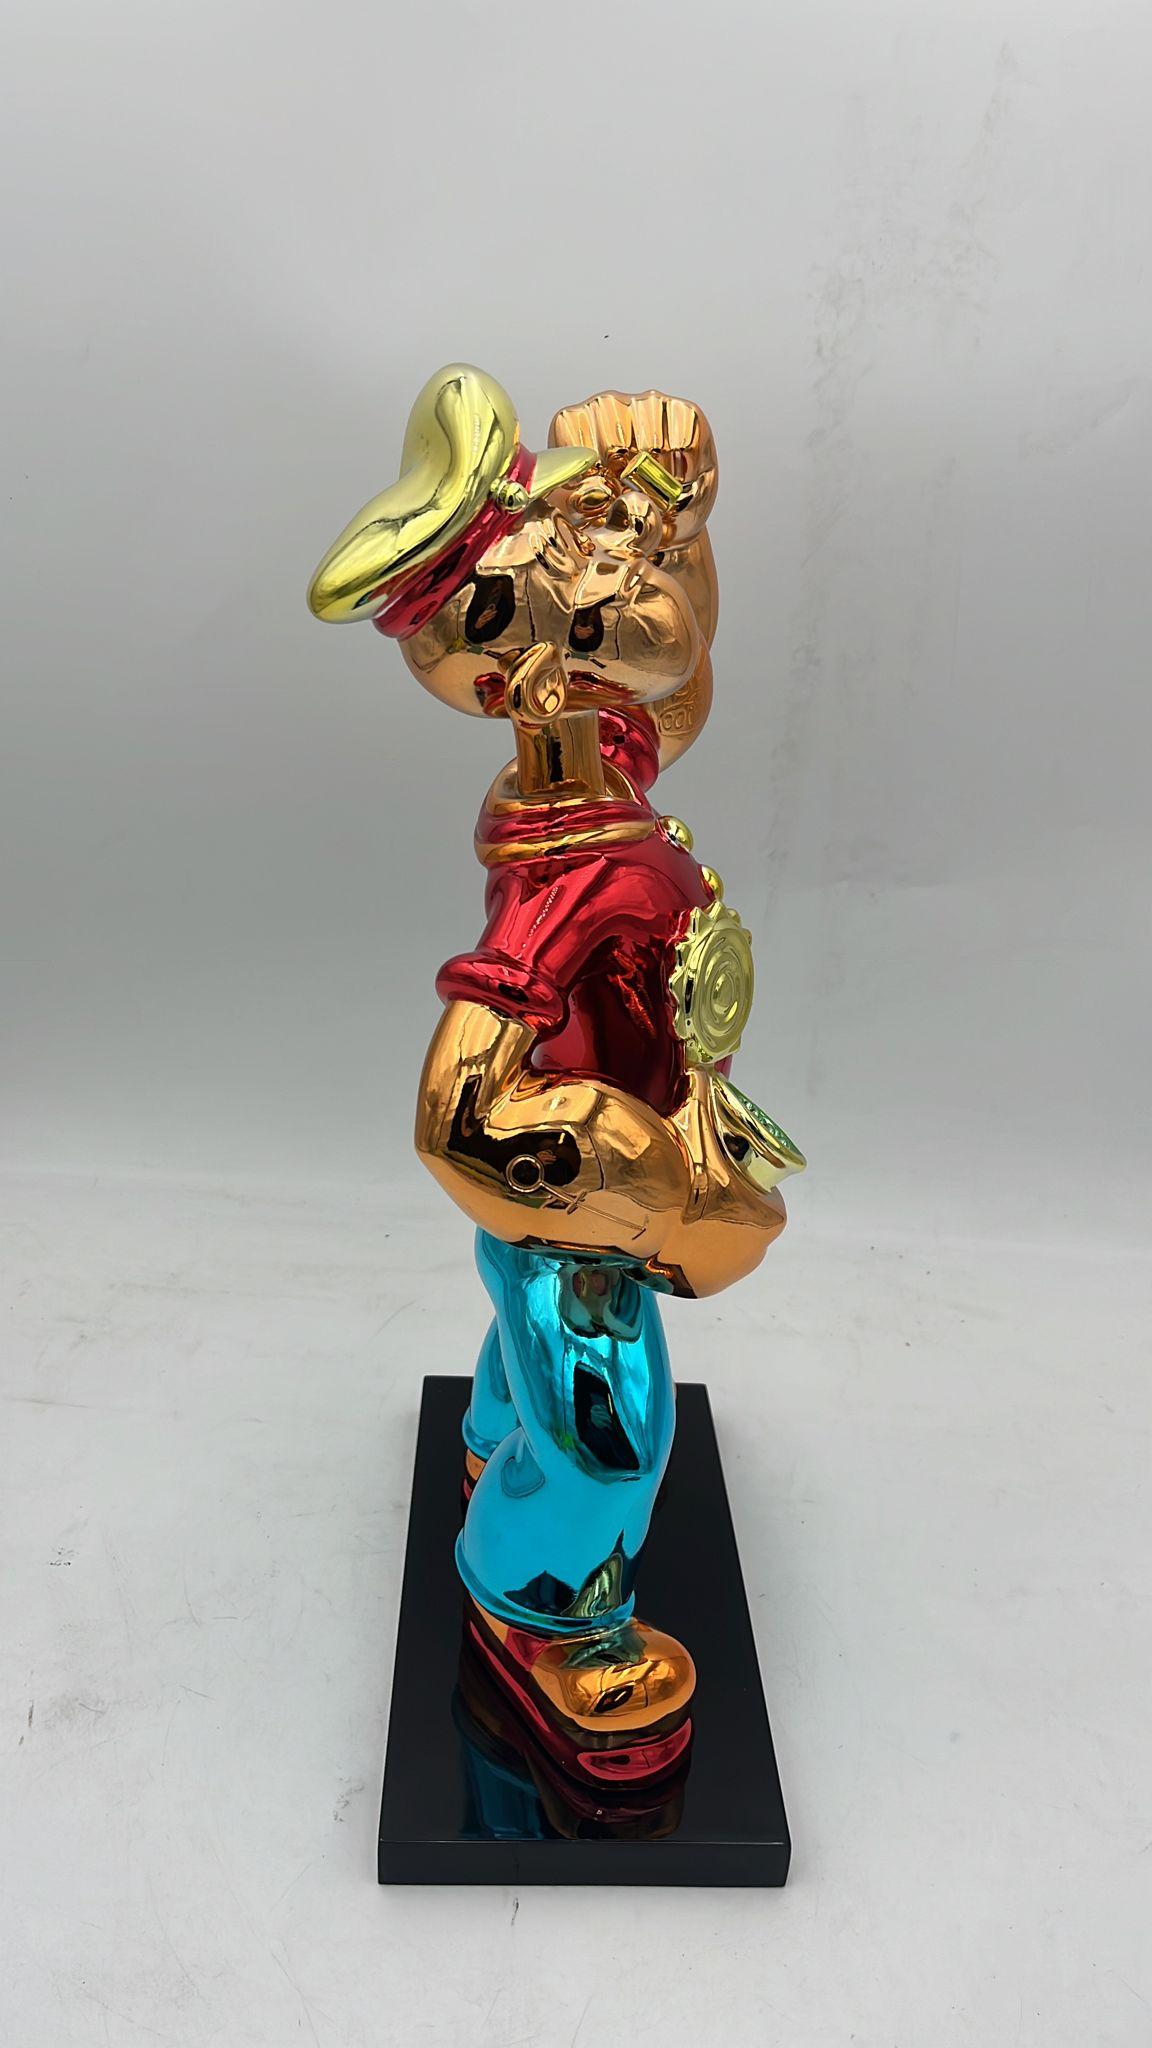 45 cm Popeye Red & Blue - Sculpture by Naor